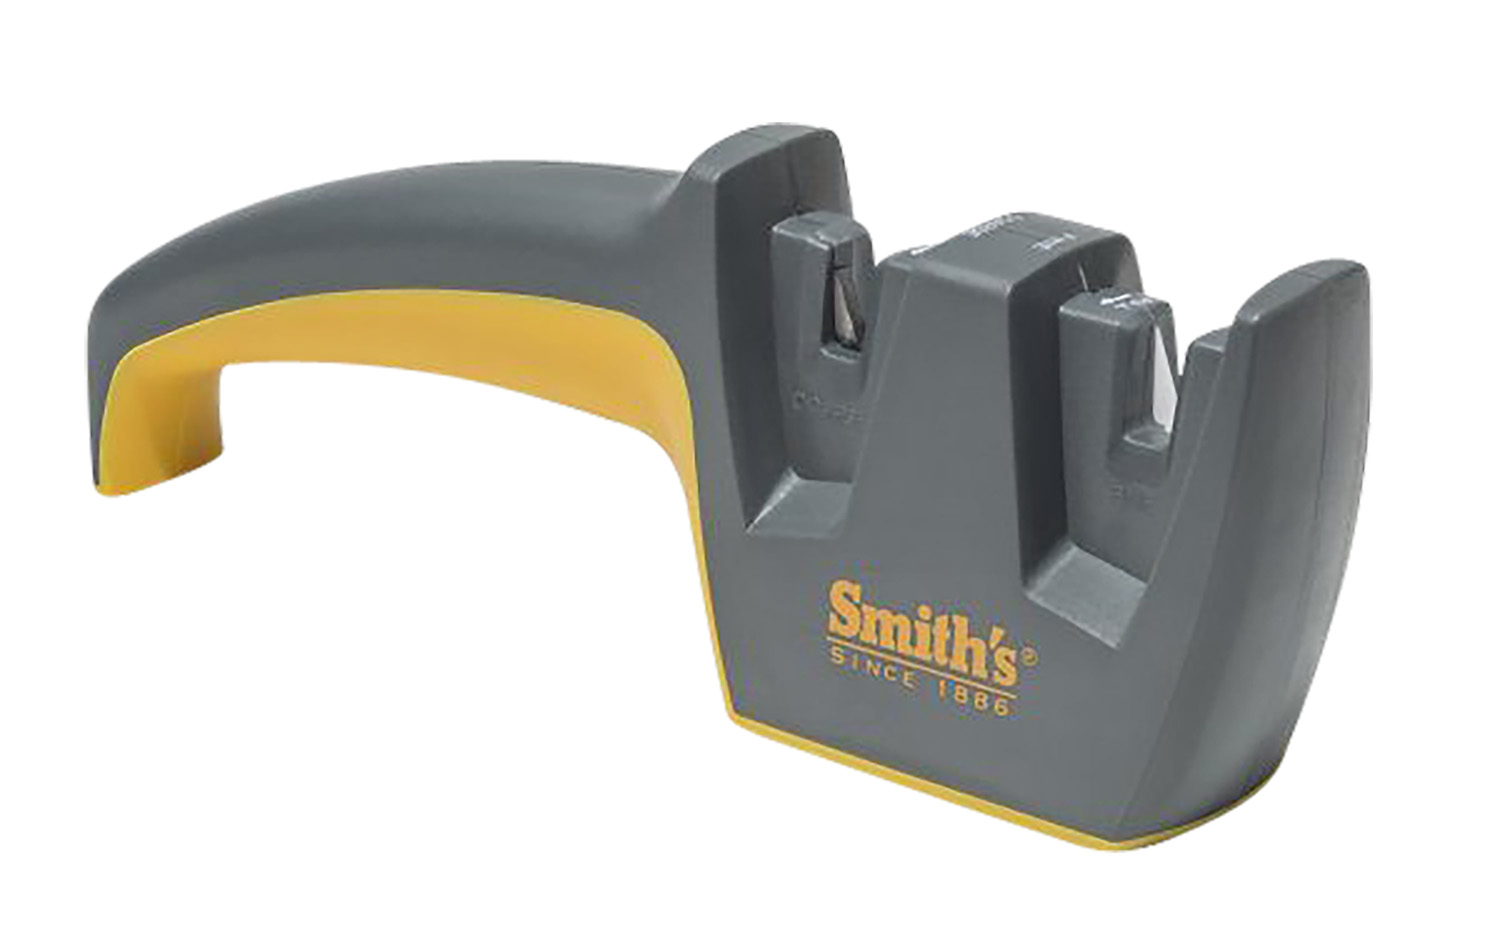 Smiths Products 50364 Pocket Pal X2 Sharpener and Outdoor Tool